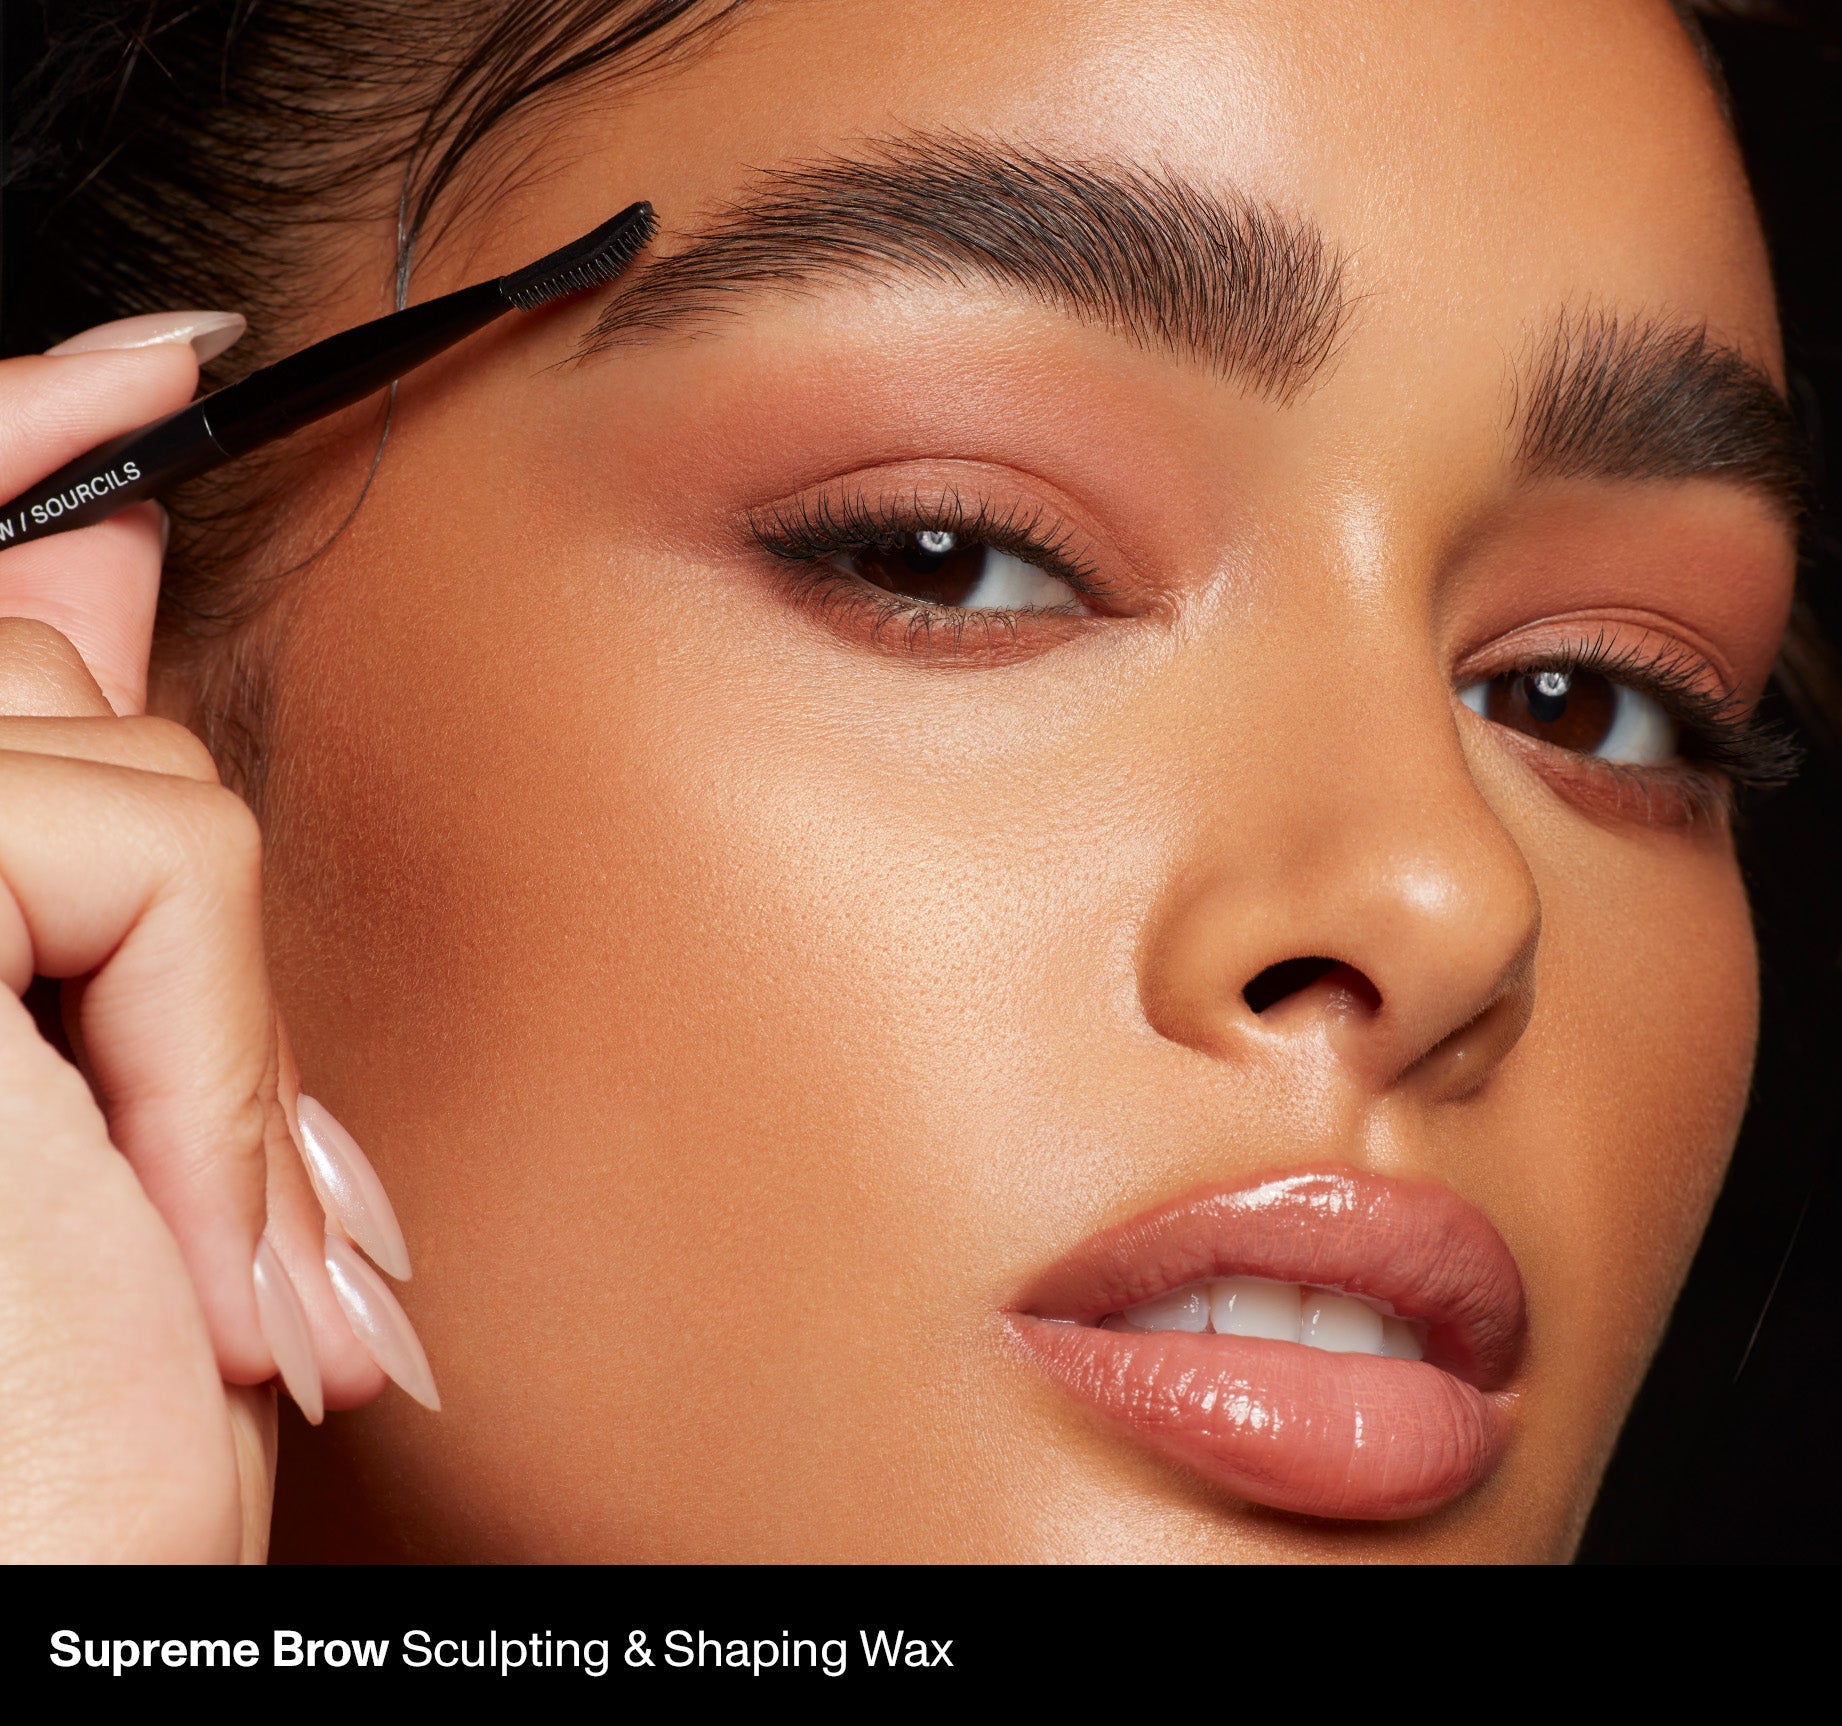 Supreme Brow Sculpting And Shaping Wax - Latte - Image 8